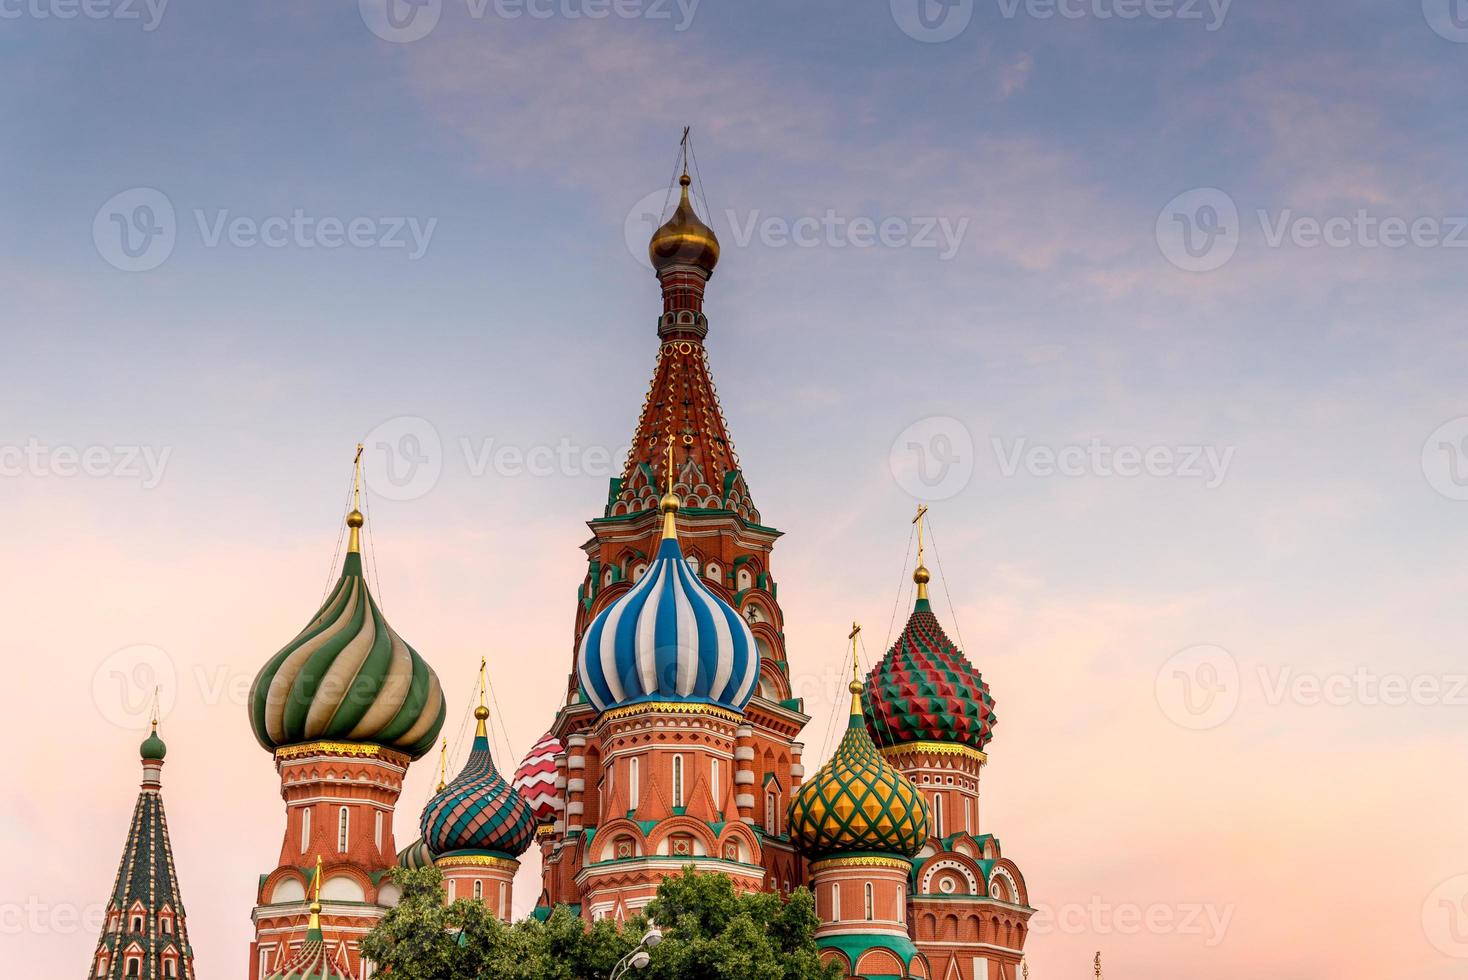 St Basil's Cathedral photo